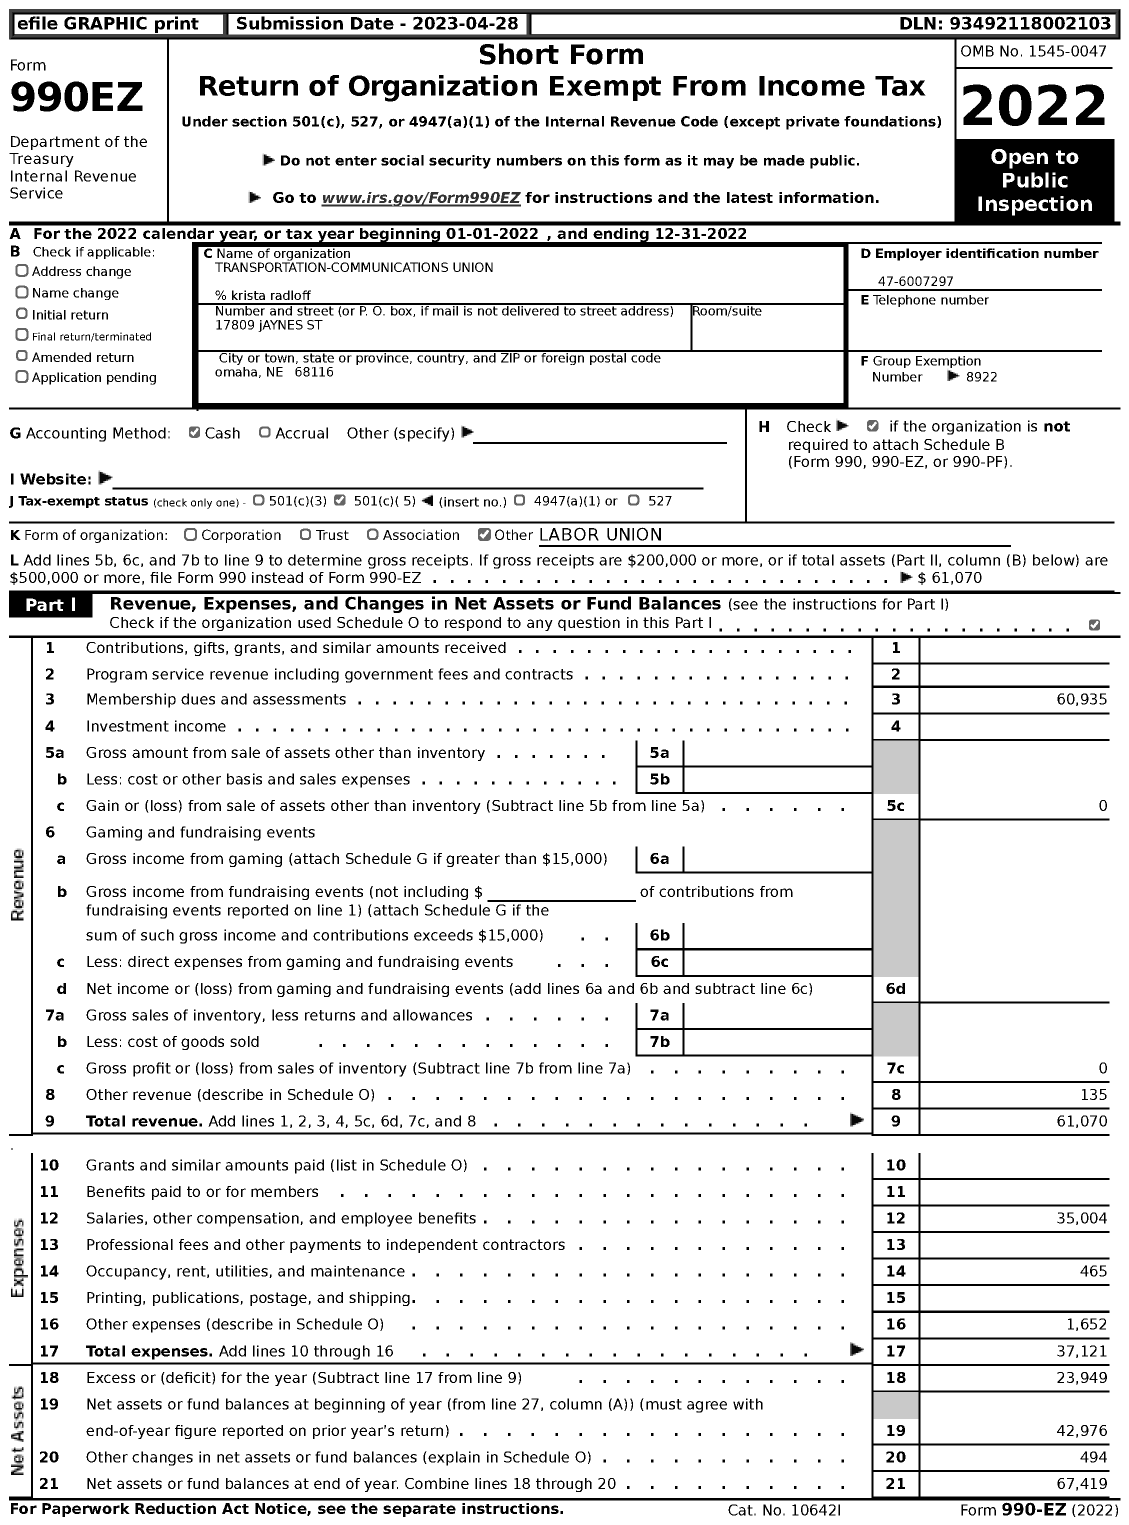 Image of first page of 2022 Form 990EZ for TRANSPORTATION-COMMUNICATIONS UNION / T763 Lodge